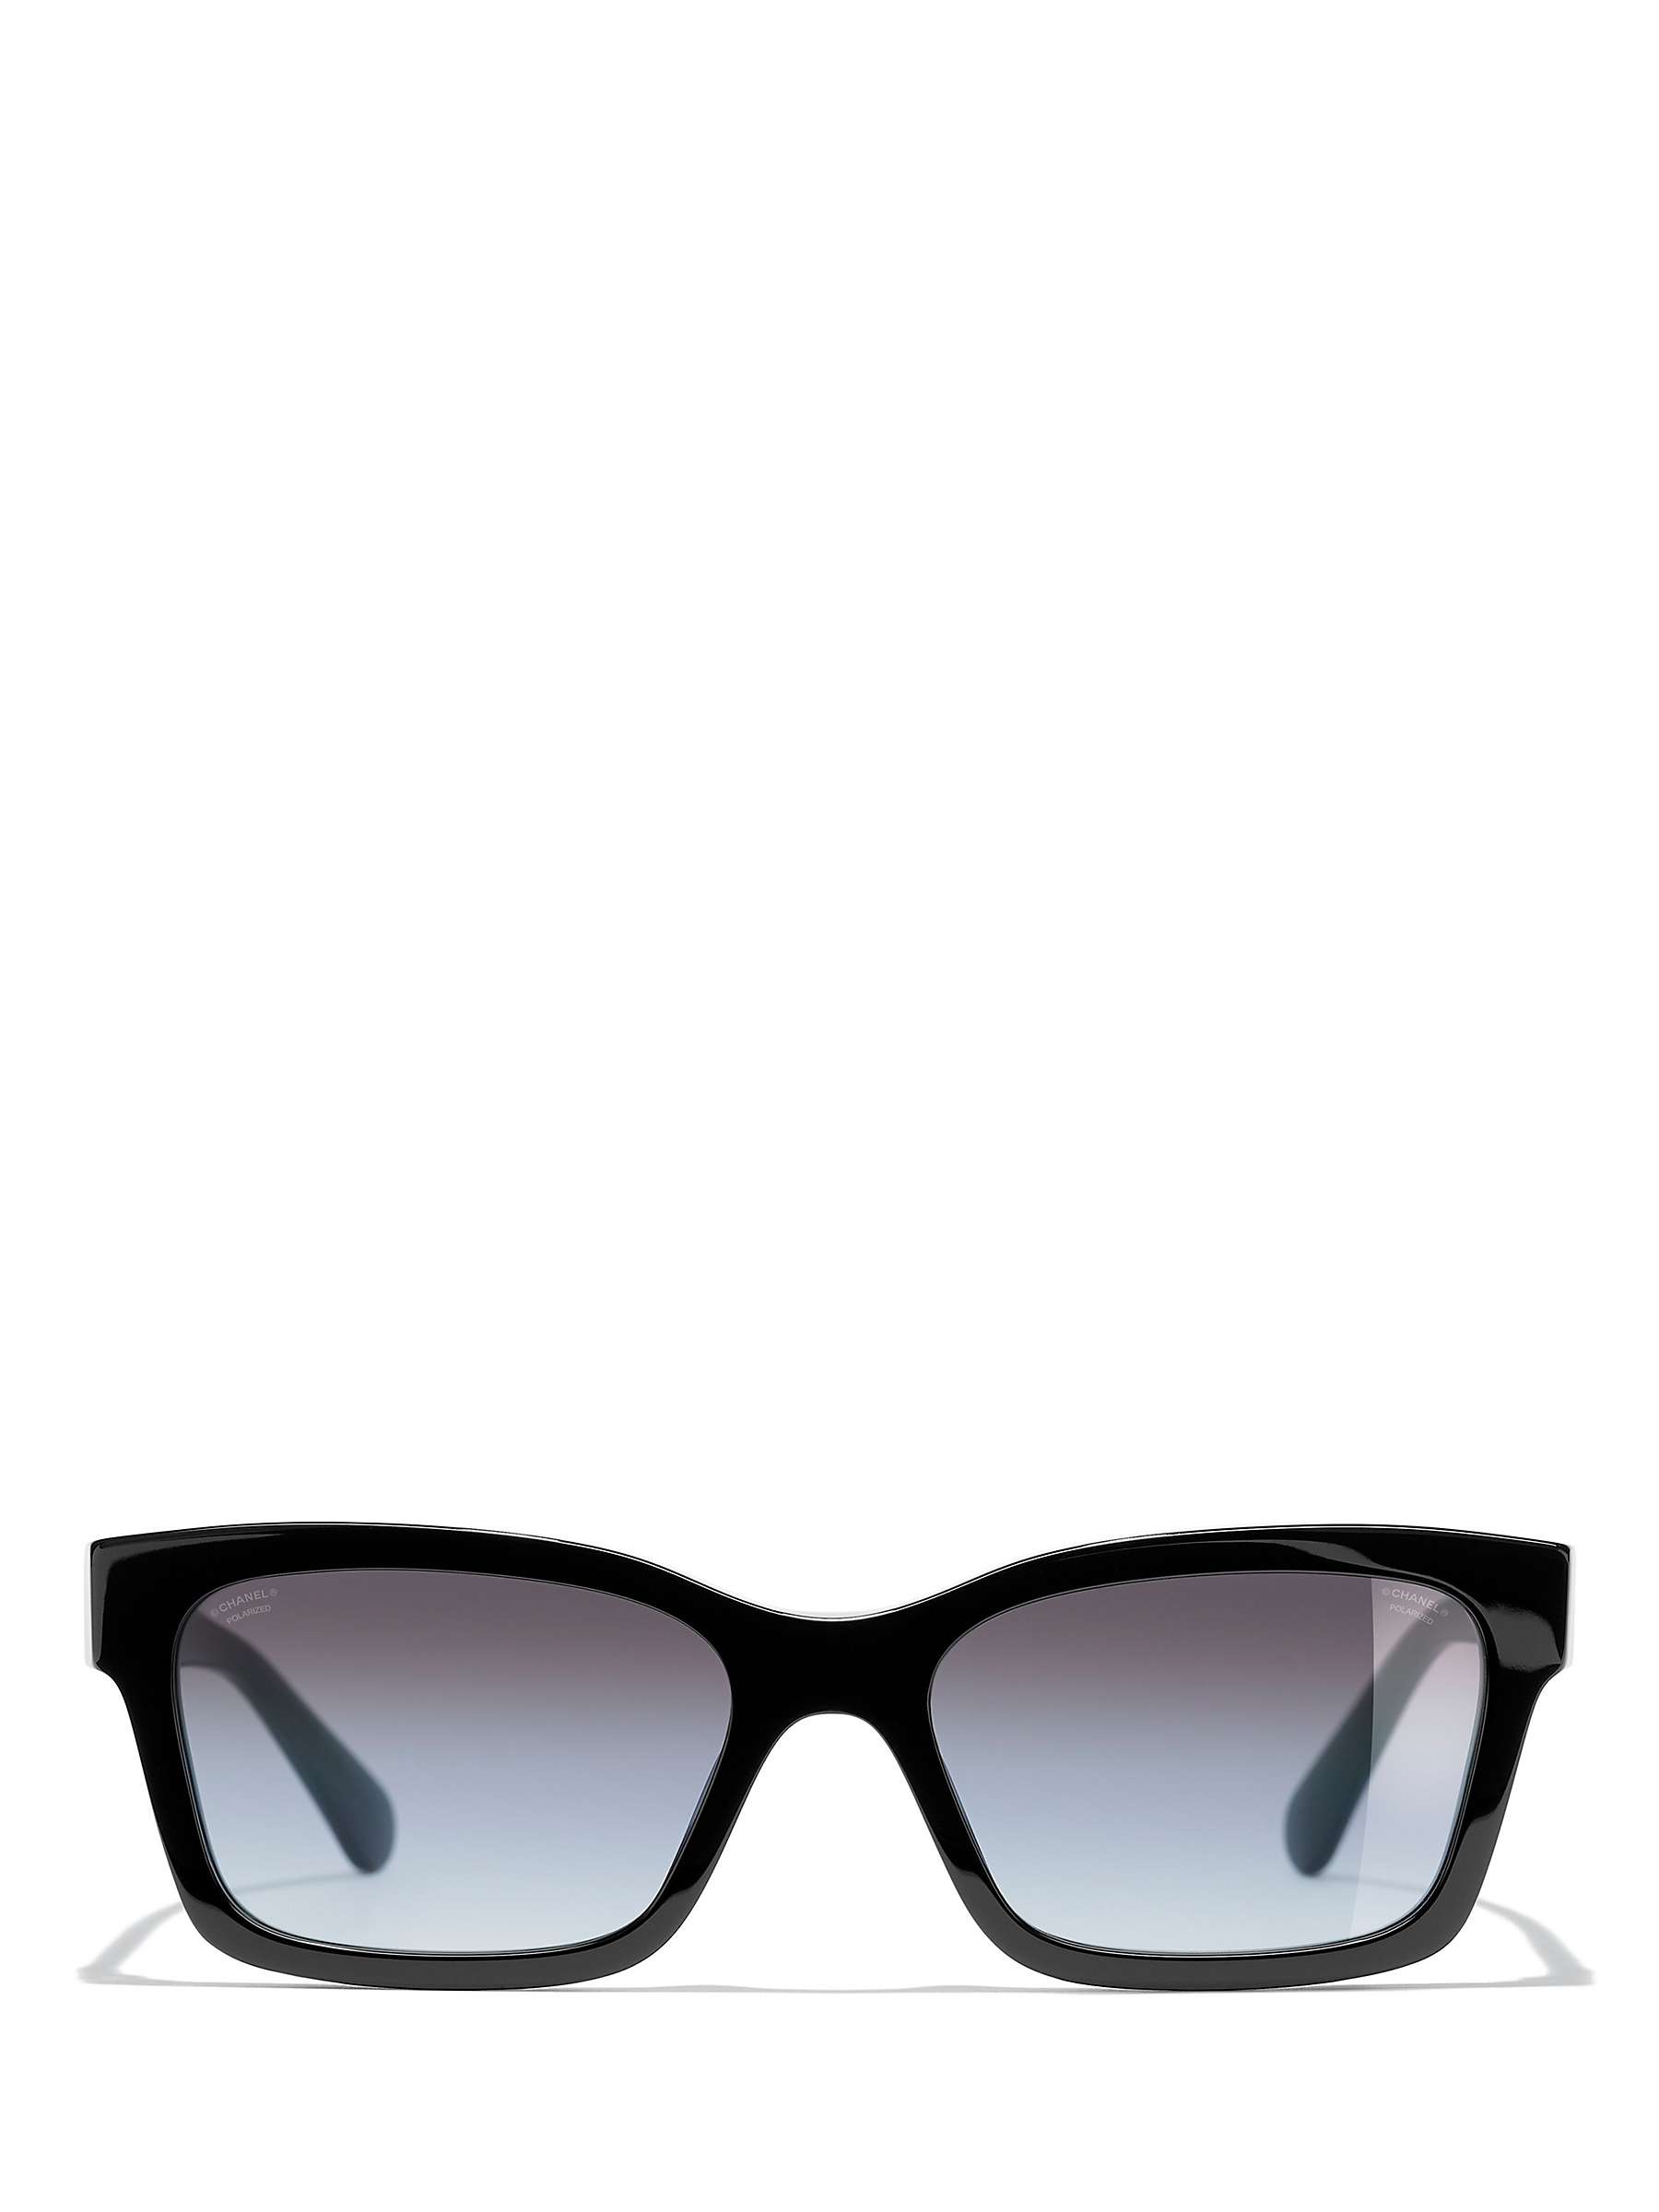 Buy CHANEL Square Sunglasses CH5417 Black Online at johnlewis.com